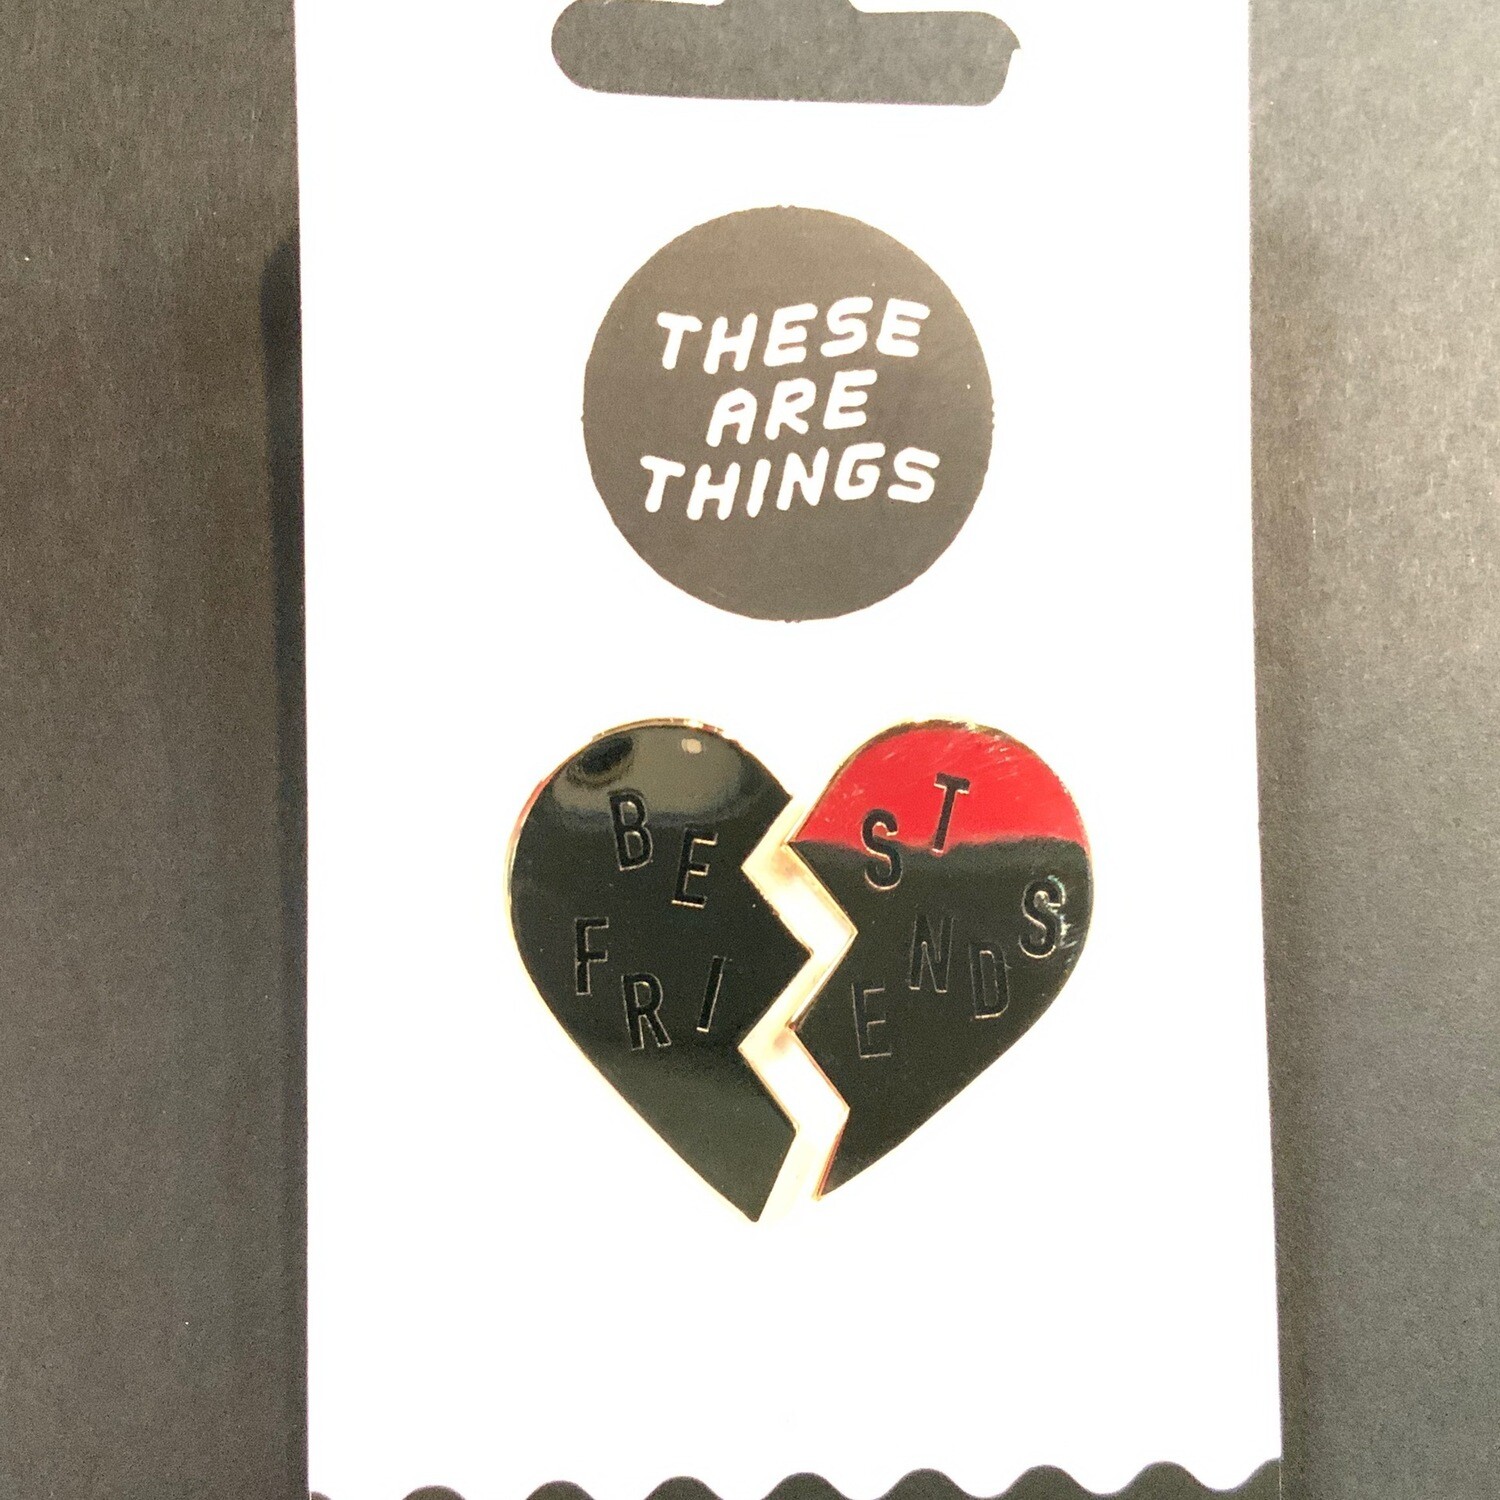 Best Friends - Enamel Pin Set from These Are Things